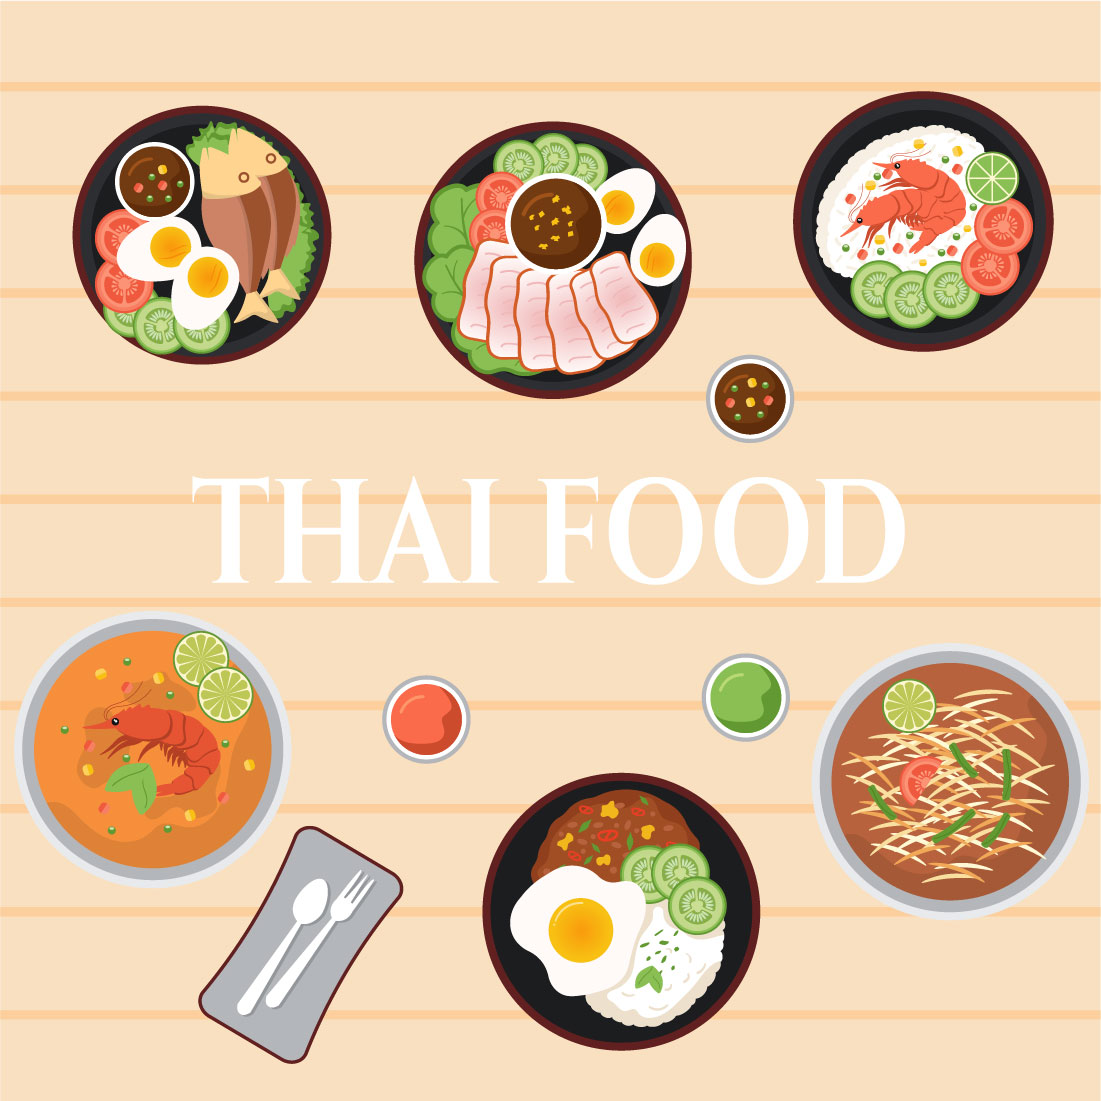 Traditional Thai Food Illustration cover image.